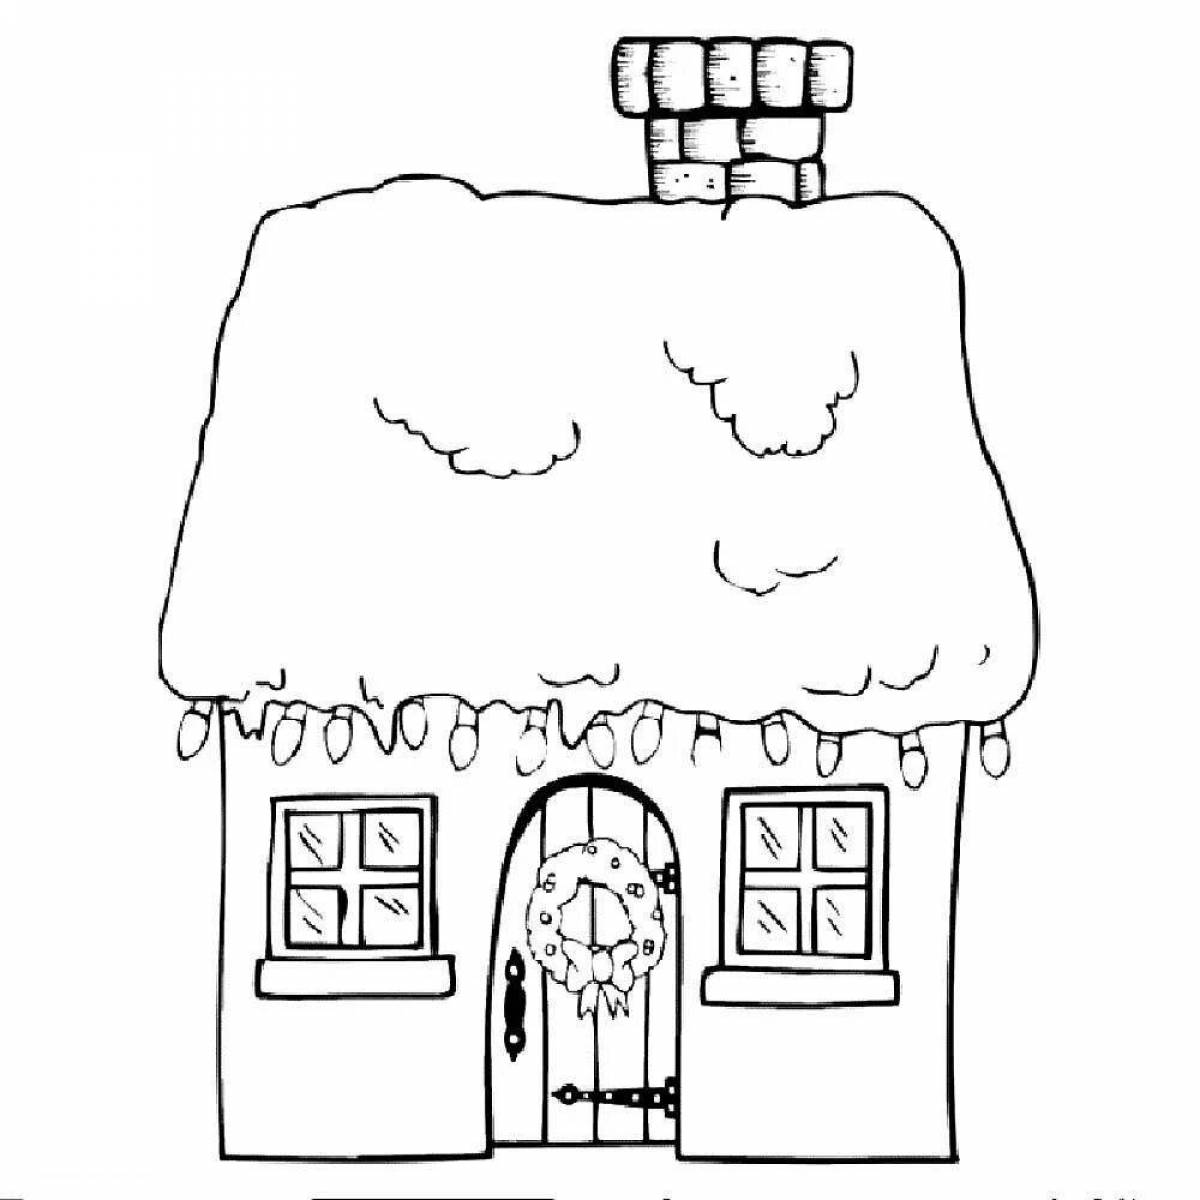 Playful winter house coloring page for kids